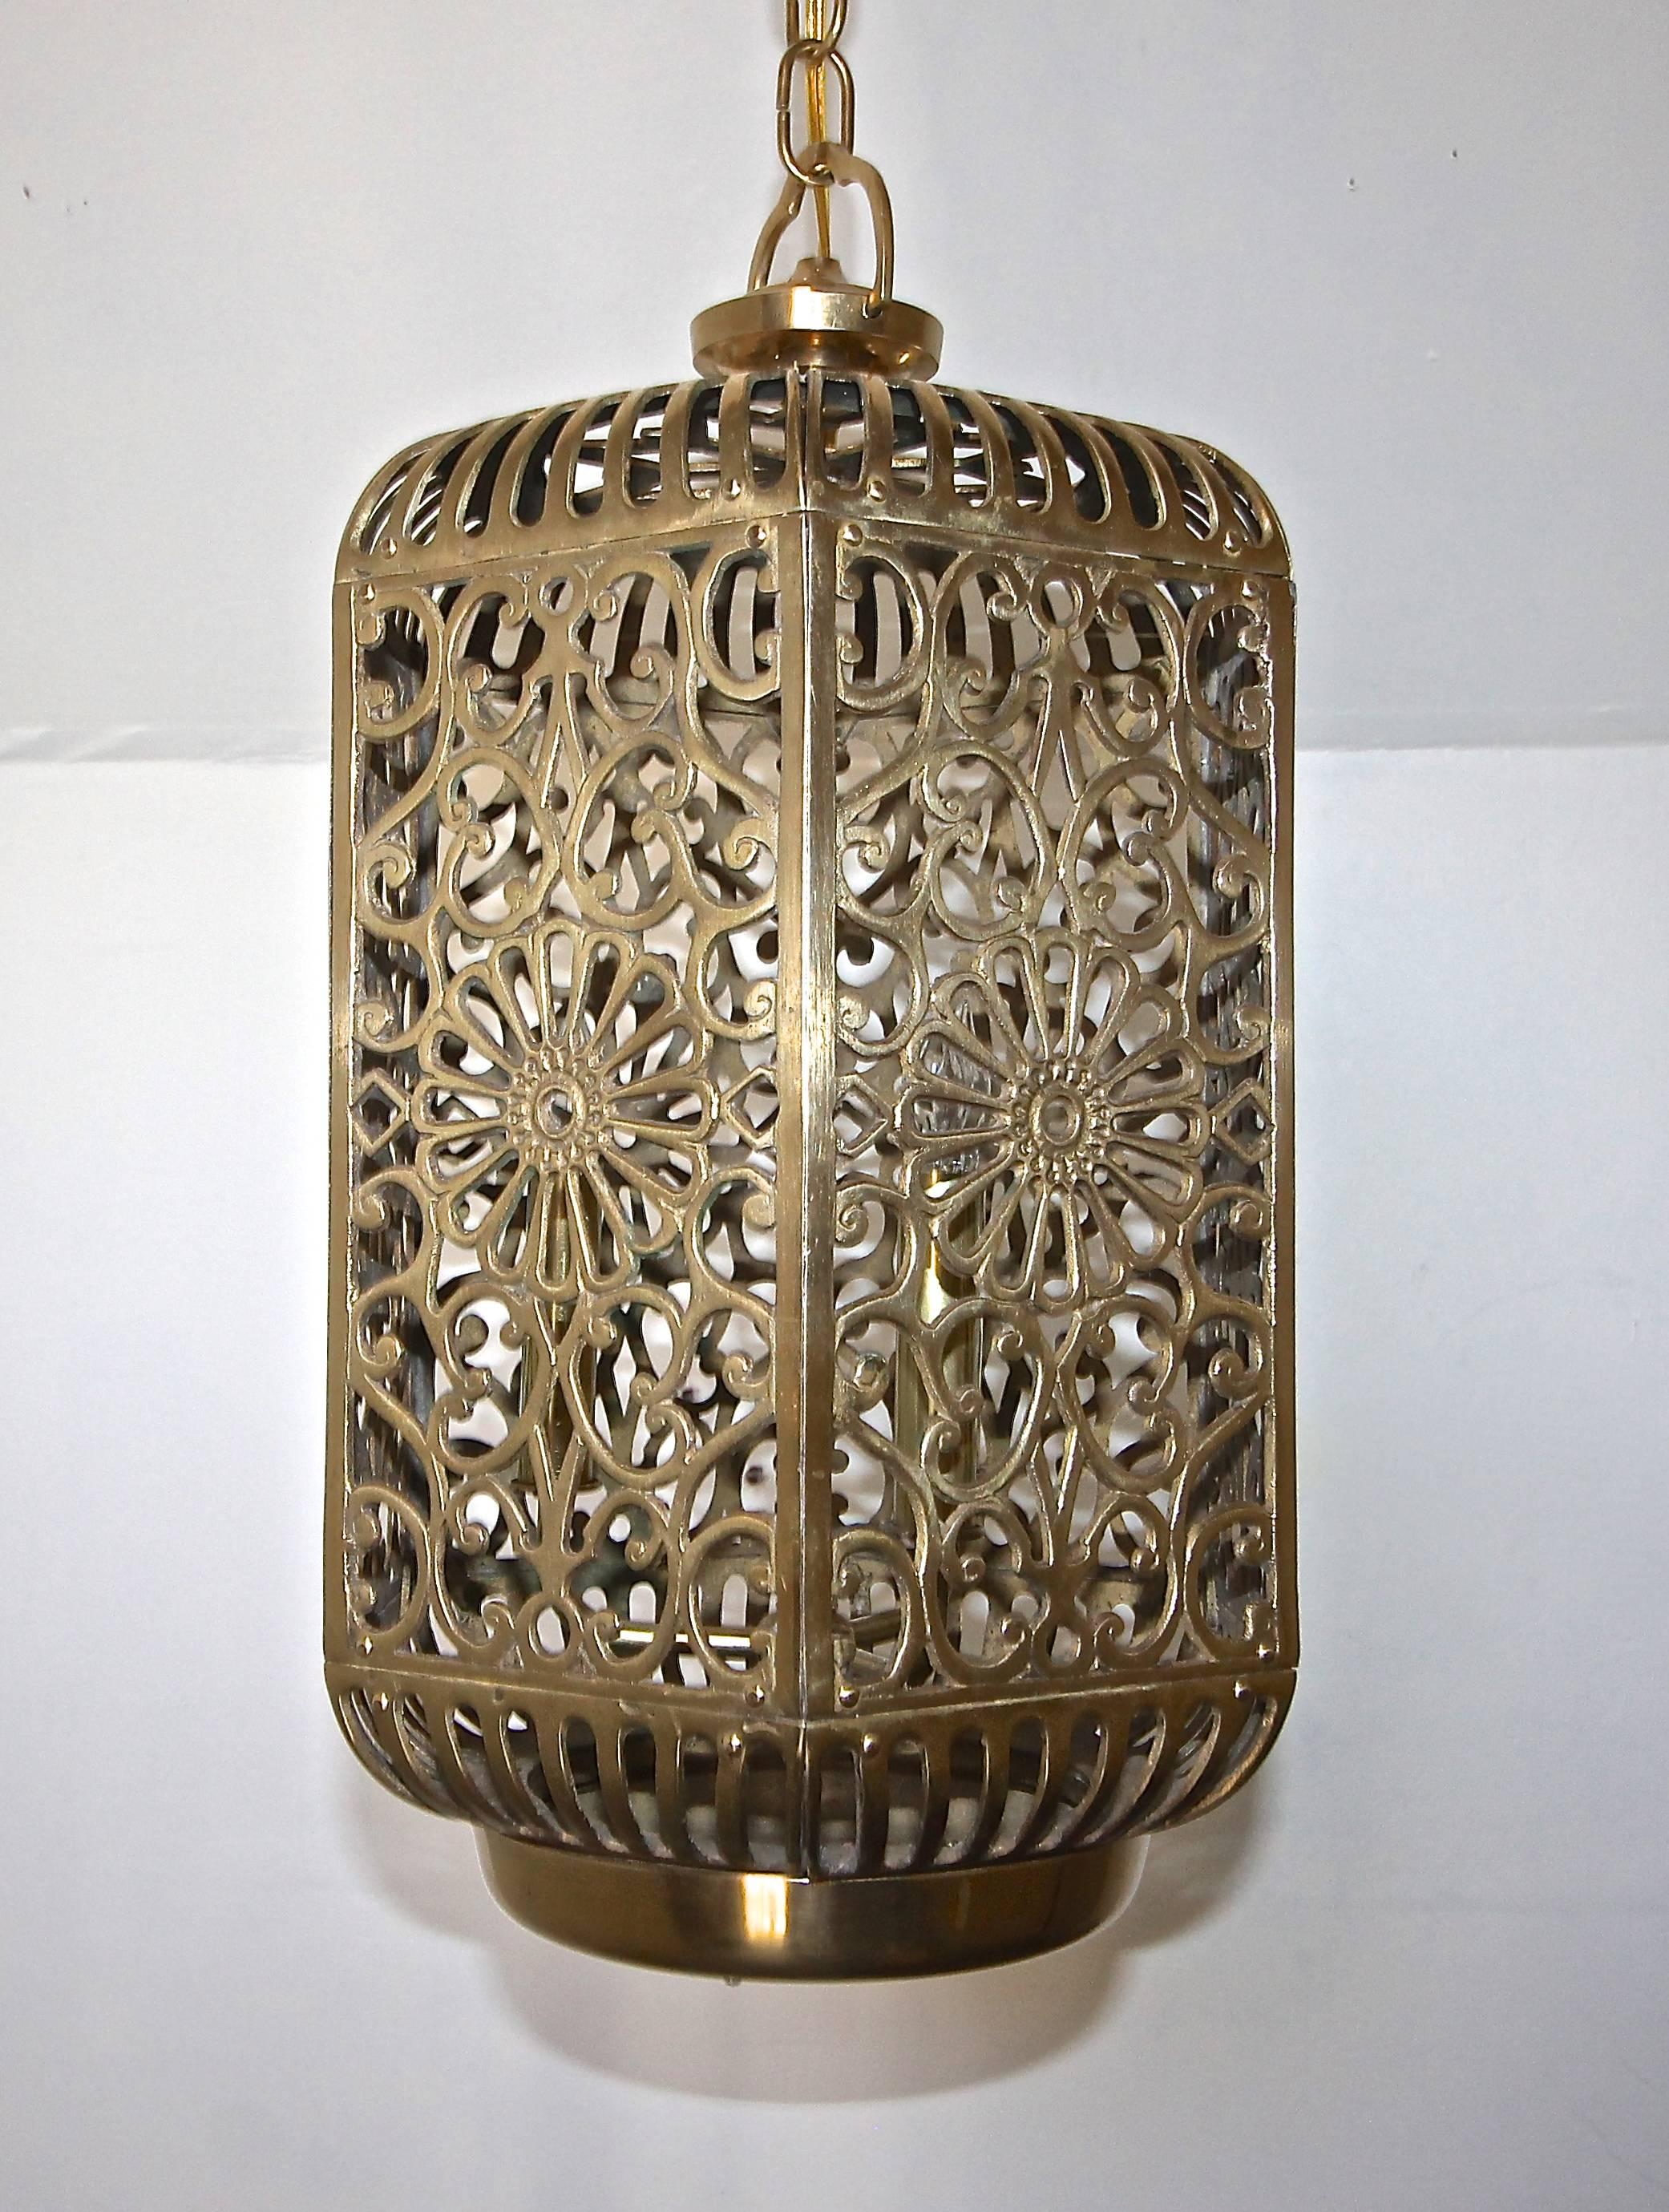 Large Pierced Filigree Brass Japanese Asian Ceiling Pendant Light In Excellent Condition For Sale In Dallas, TX